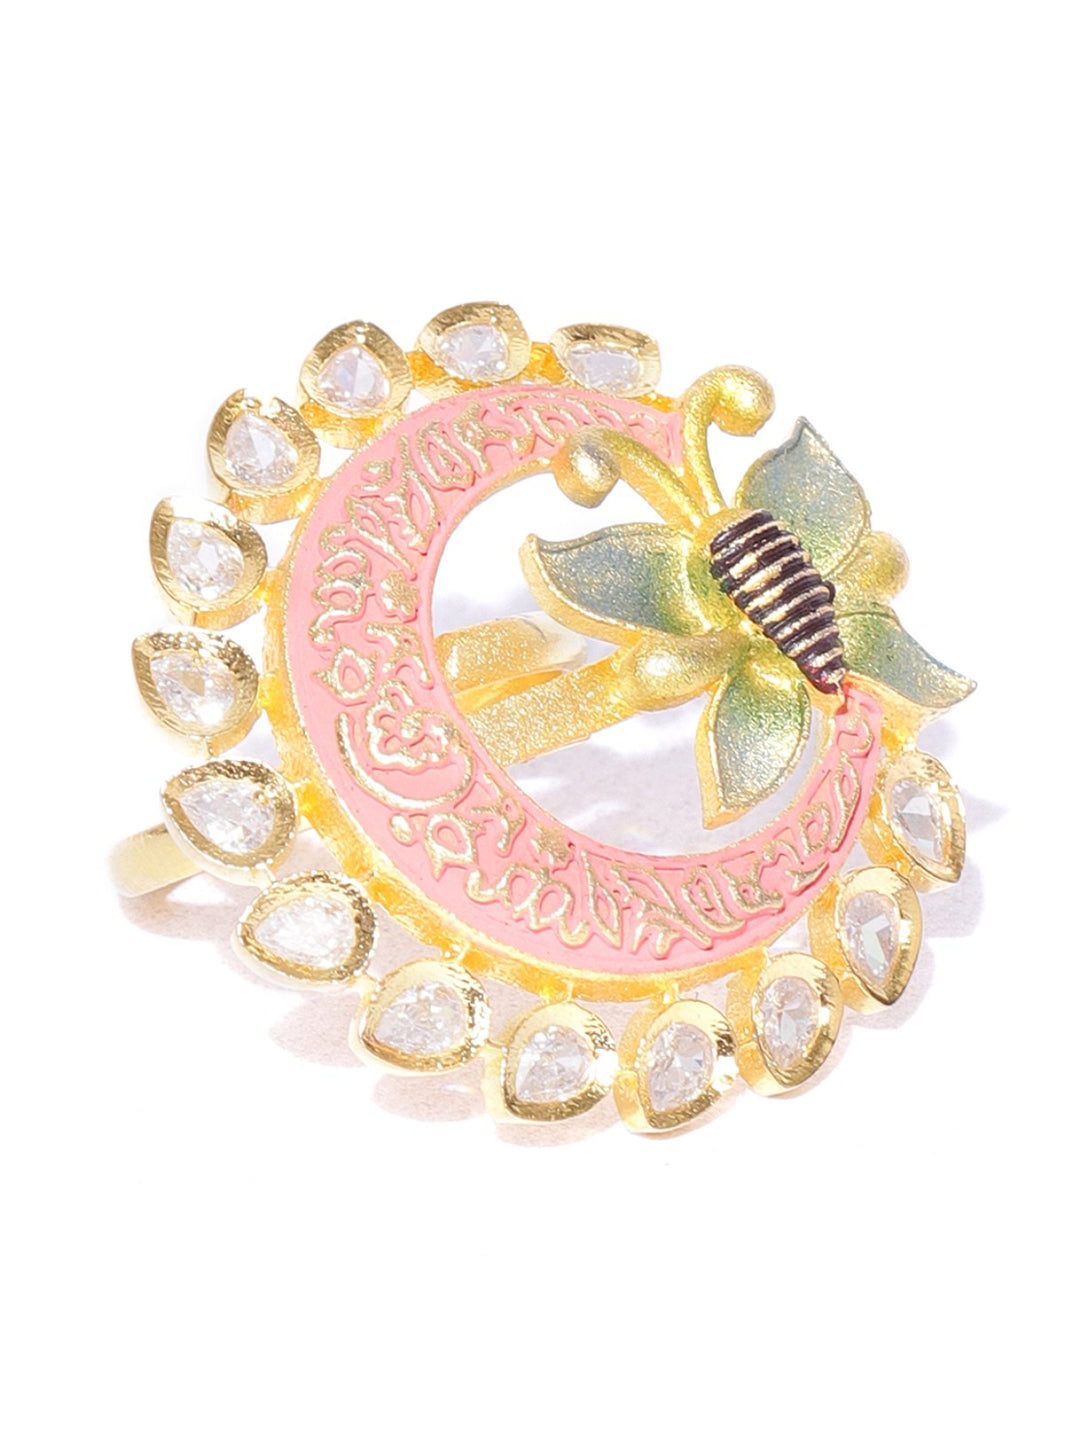 Gold-Plated Butterfly Inspired Meenakari Adjustable Ring in Peach and Green Color Studded with American Diamond